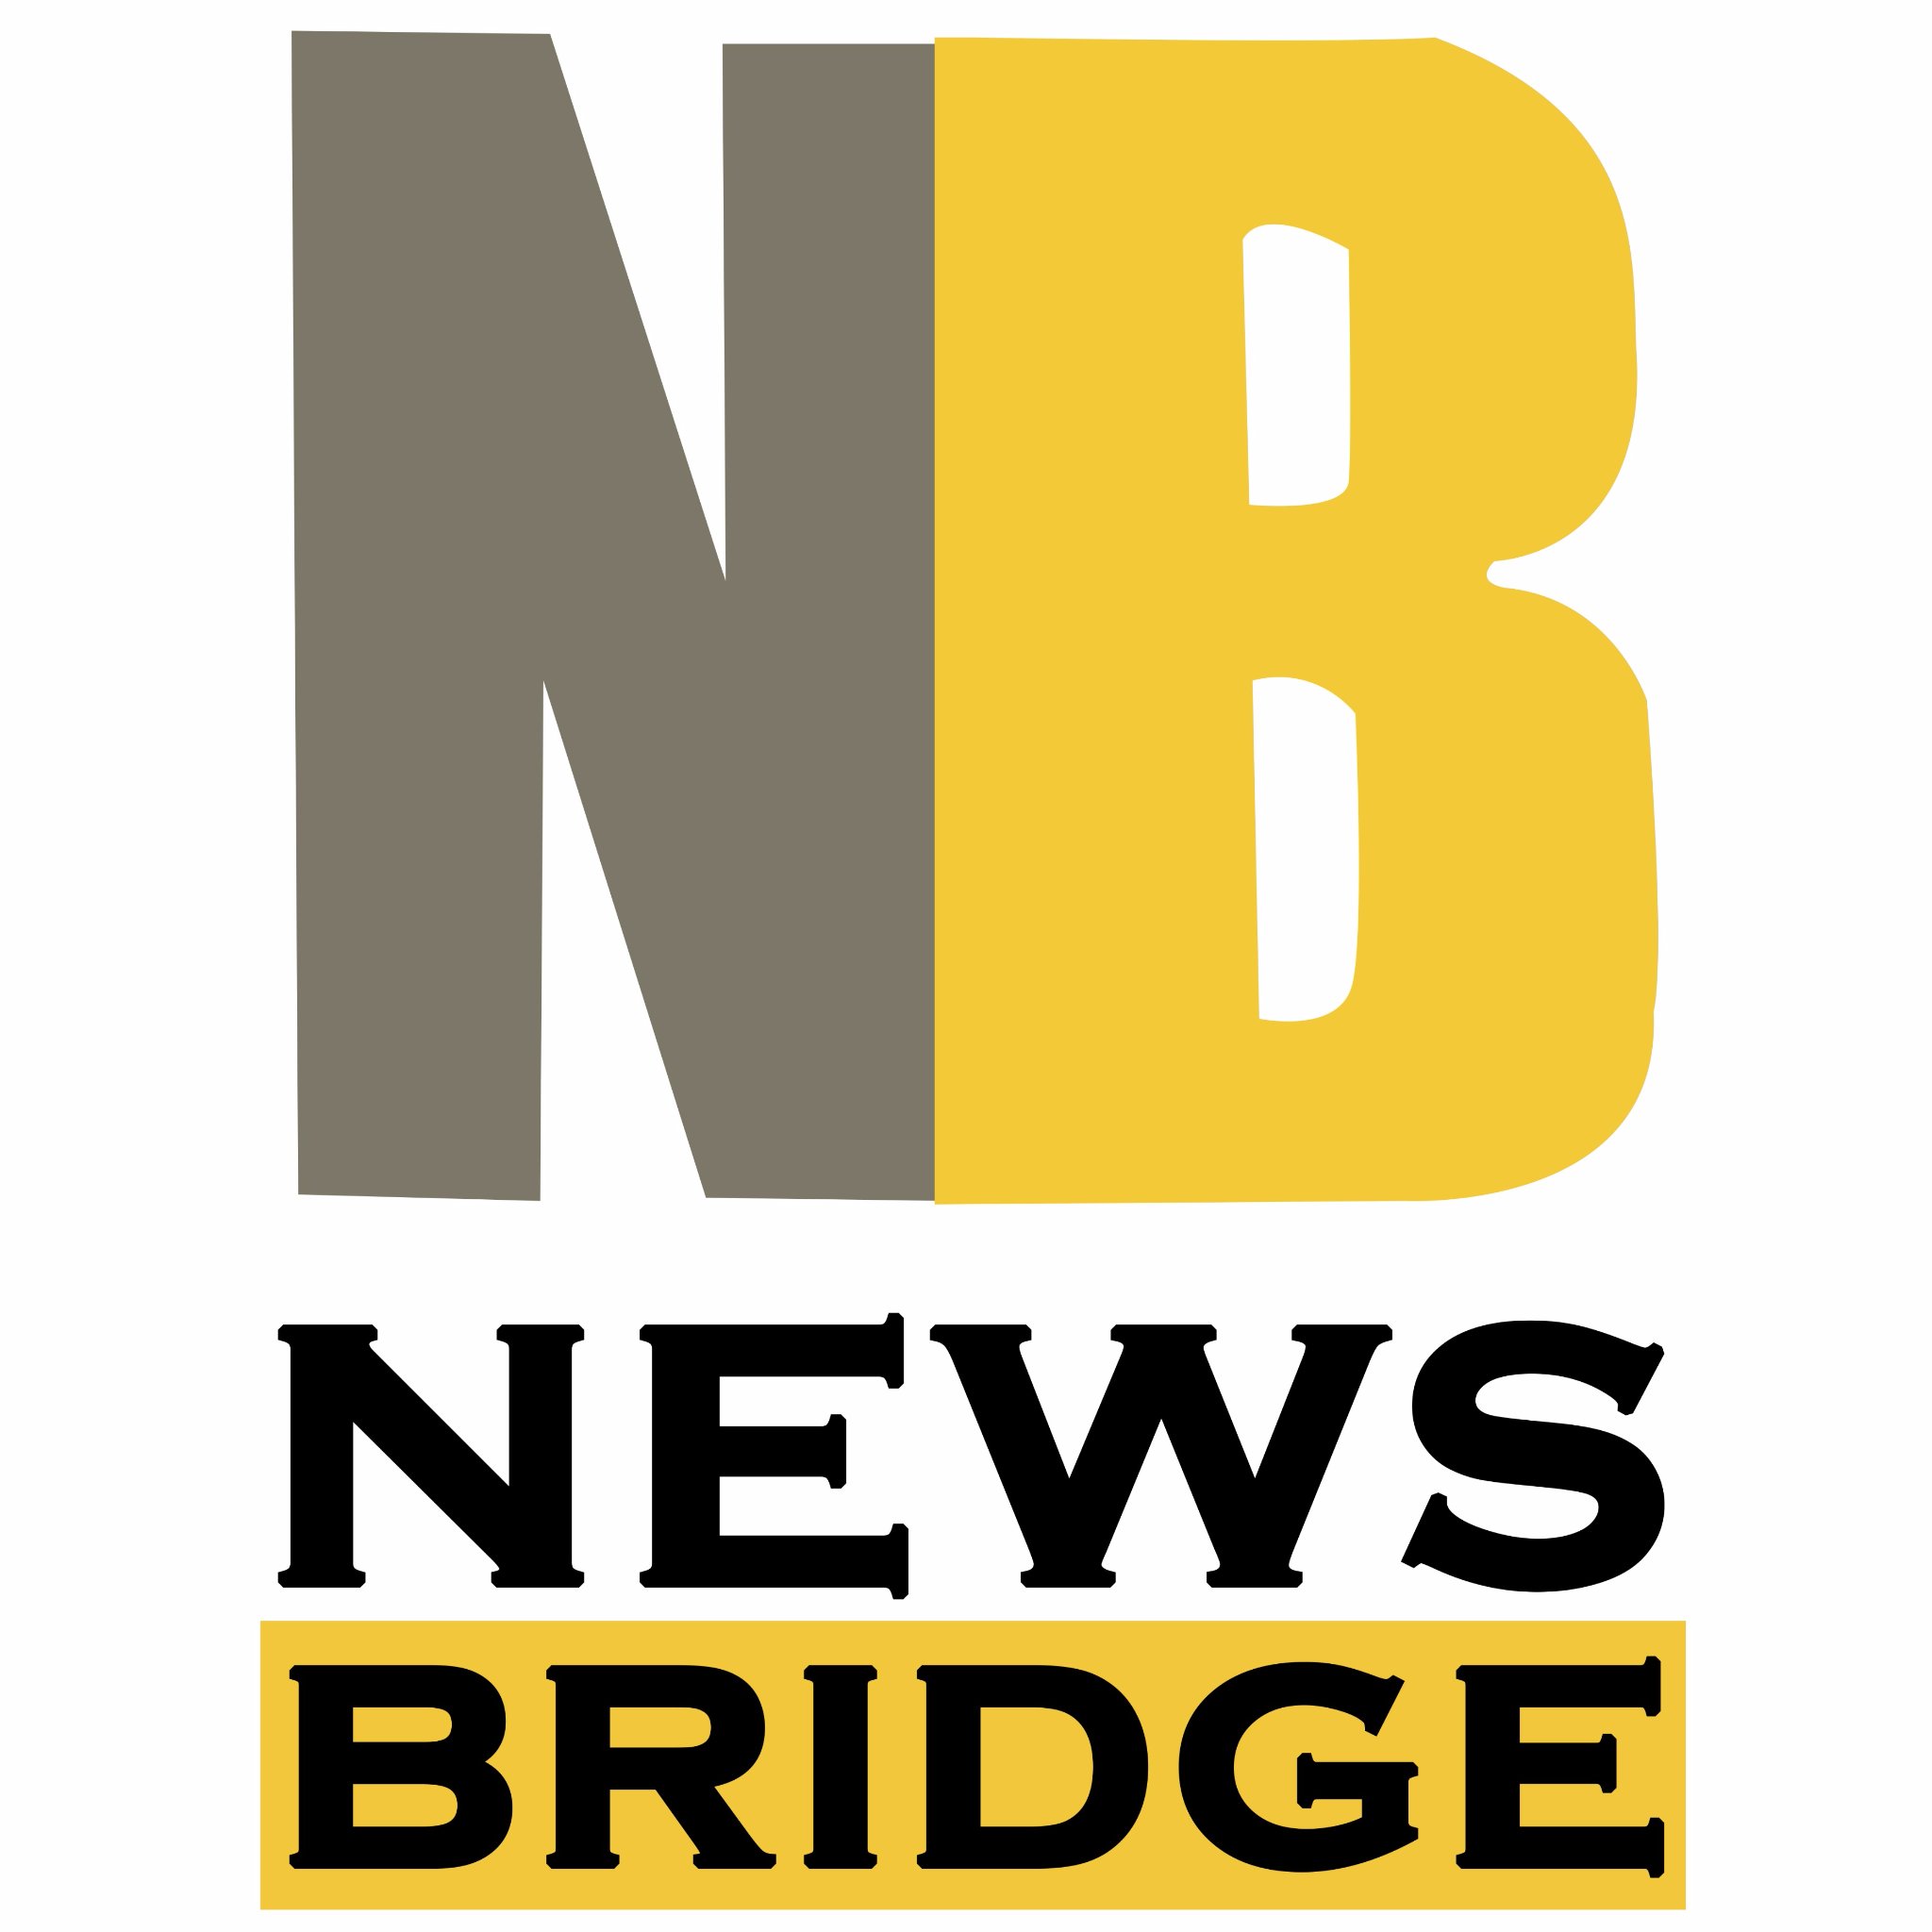 News. Views. Current Affairs

We also source & distribute breaking, exclusive news & feature, Photo/Video stories to global media. editor@newsbridge.org